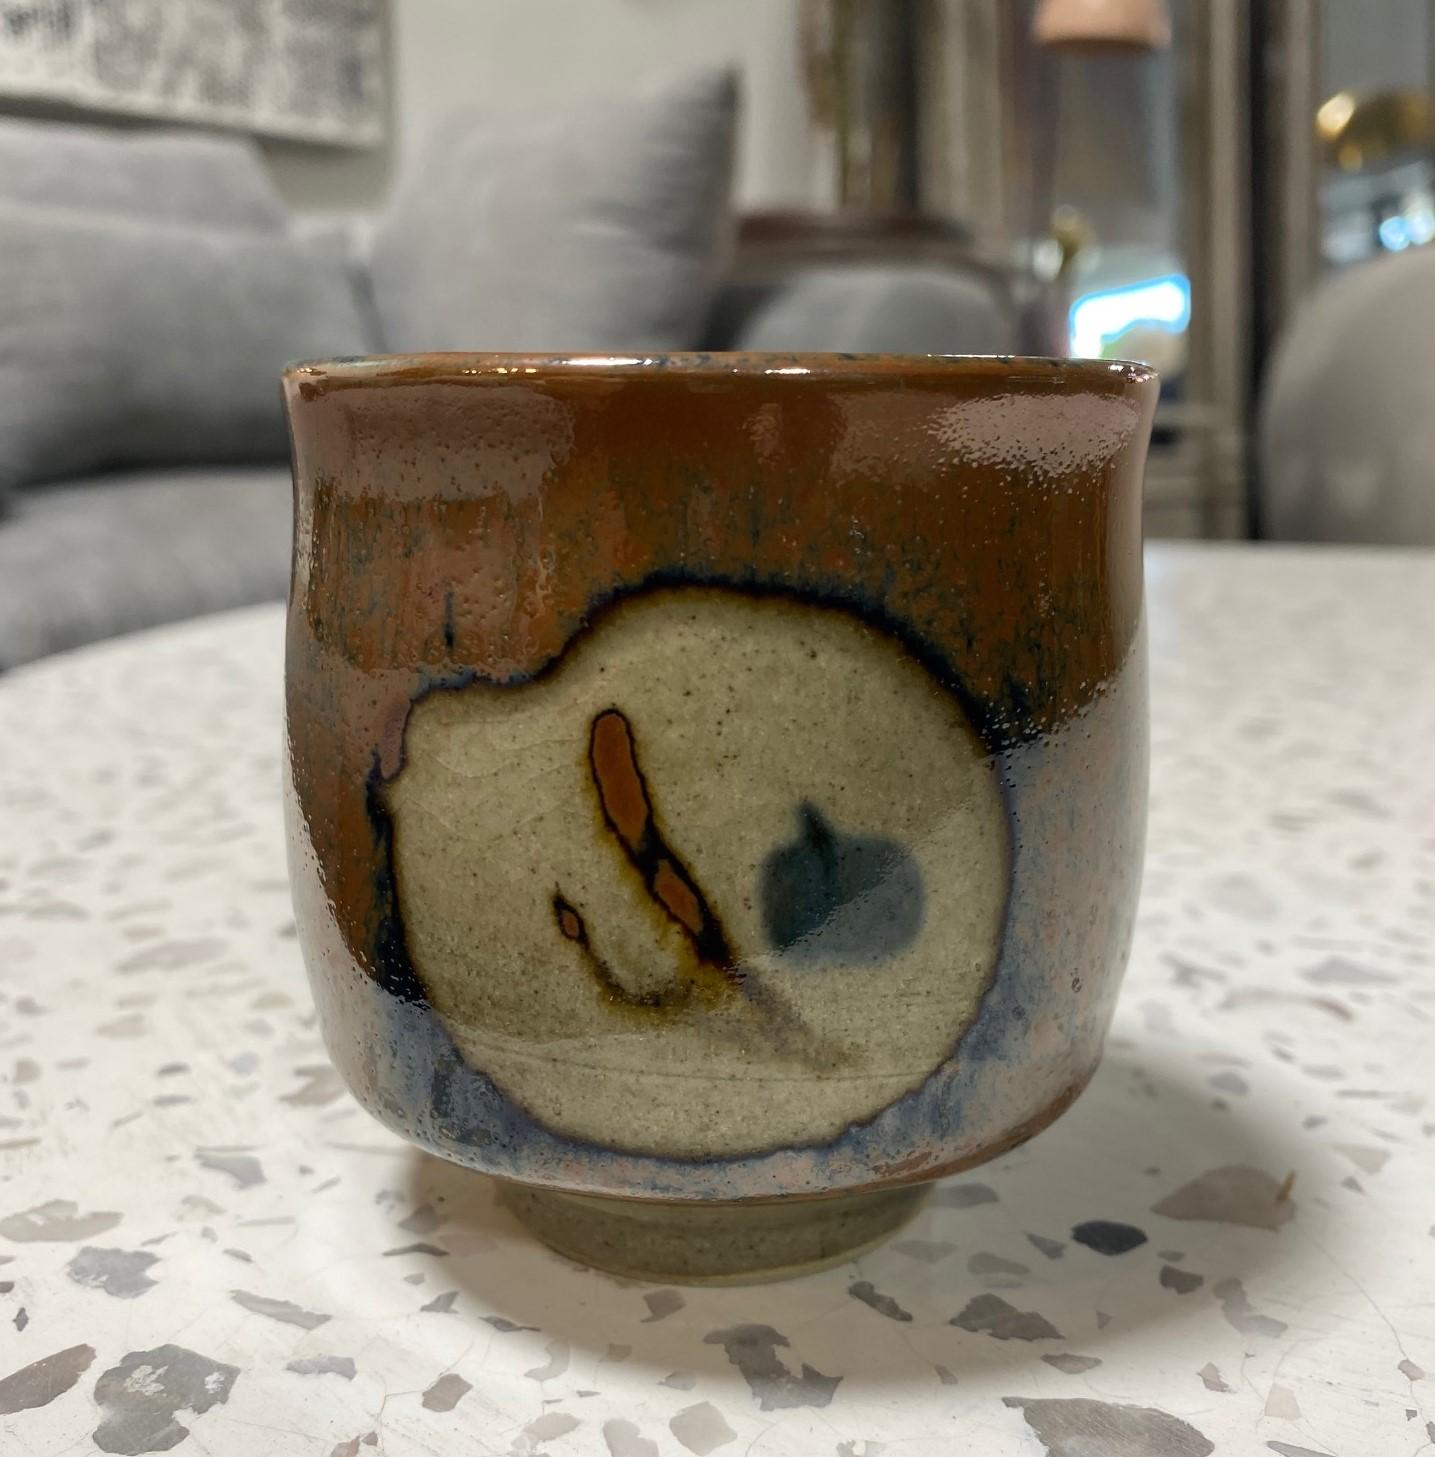 An exquisite, beautifully crafted, and wonderfully designed Yunomi teacup by master Japanese potter Shoji Hamada featuring his wax-resistant technique and highly coveted rich Kaki glaze over Mashiko stoneware pottery. A unique work. Rare to find